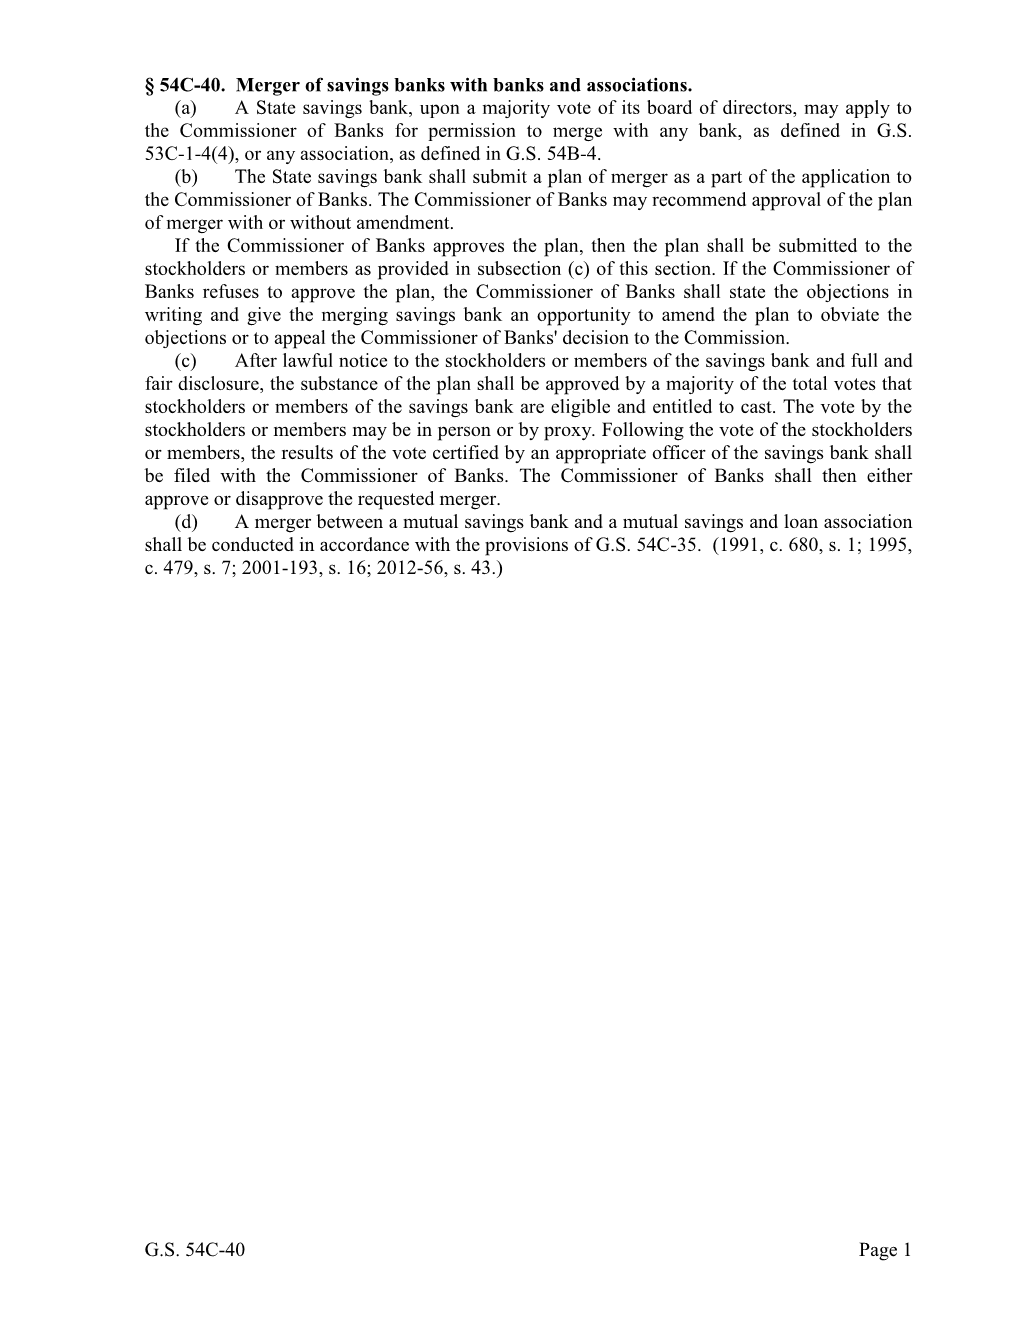 G.S. 54C-40 Page 1 § 54C-40. Merger of Savings Banks with Banks And